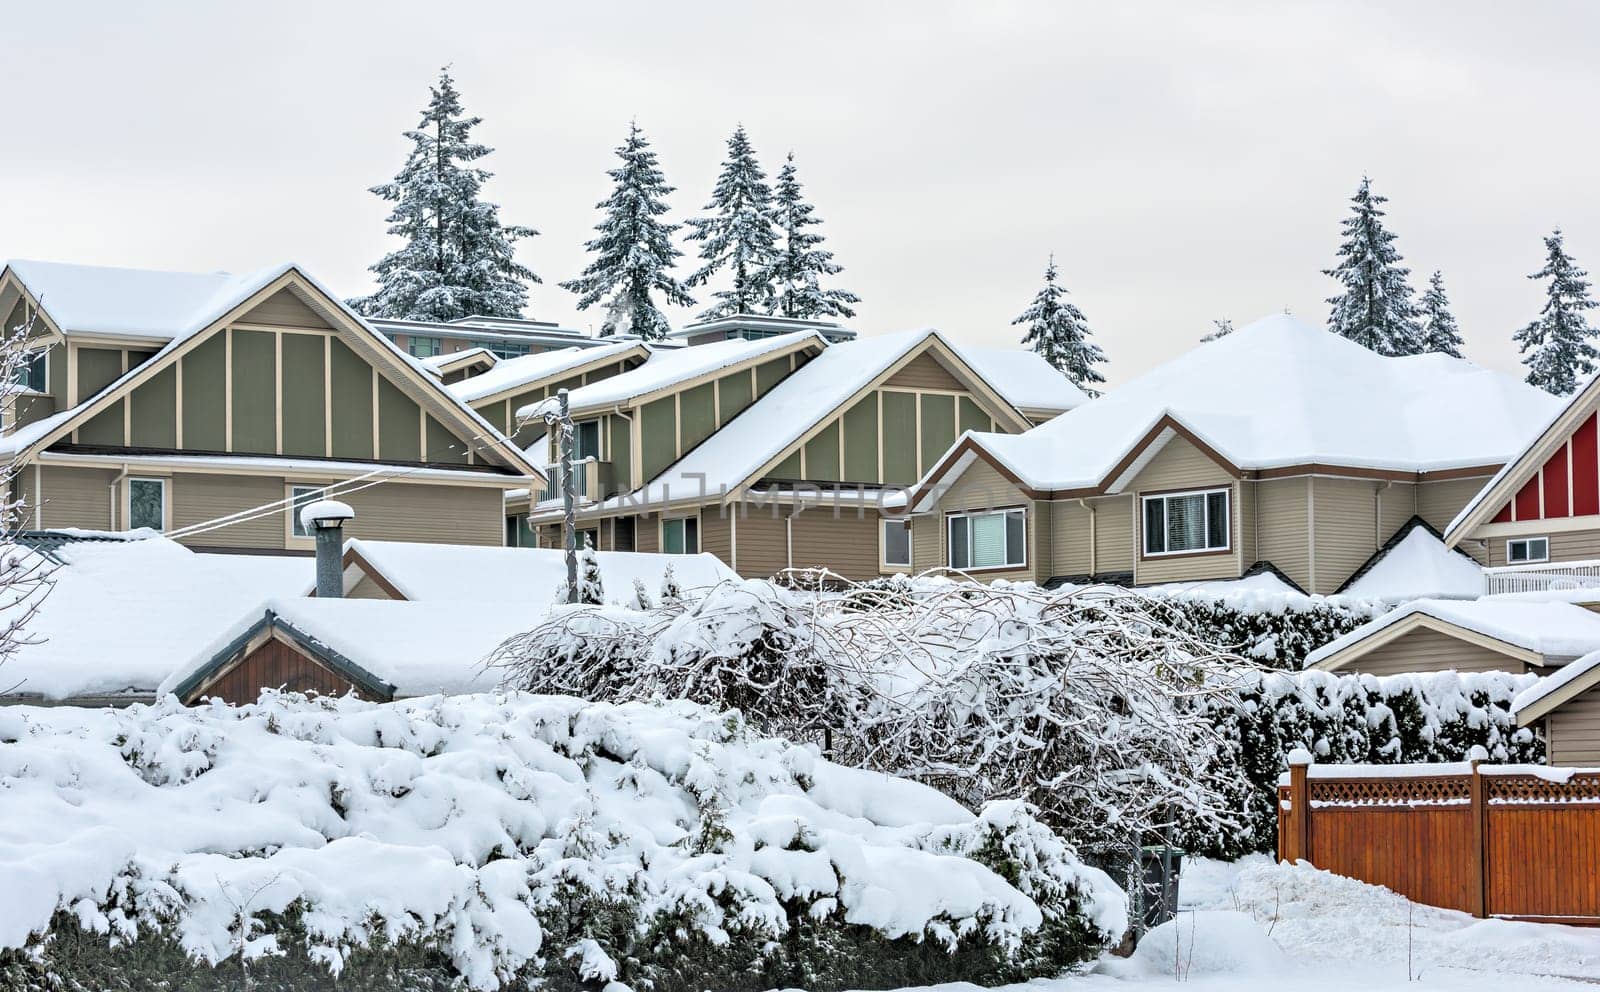 Roofs of residential townhouses in snow on winter season in Vancouver, Canada